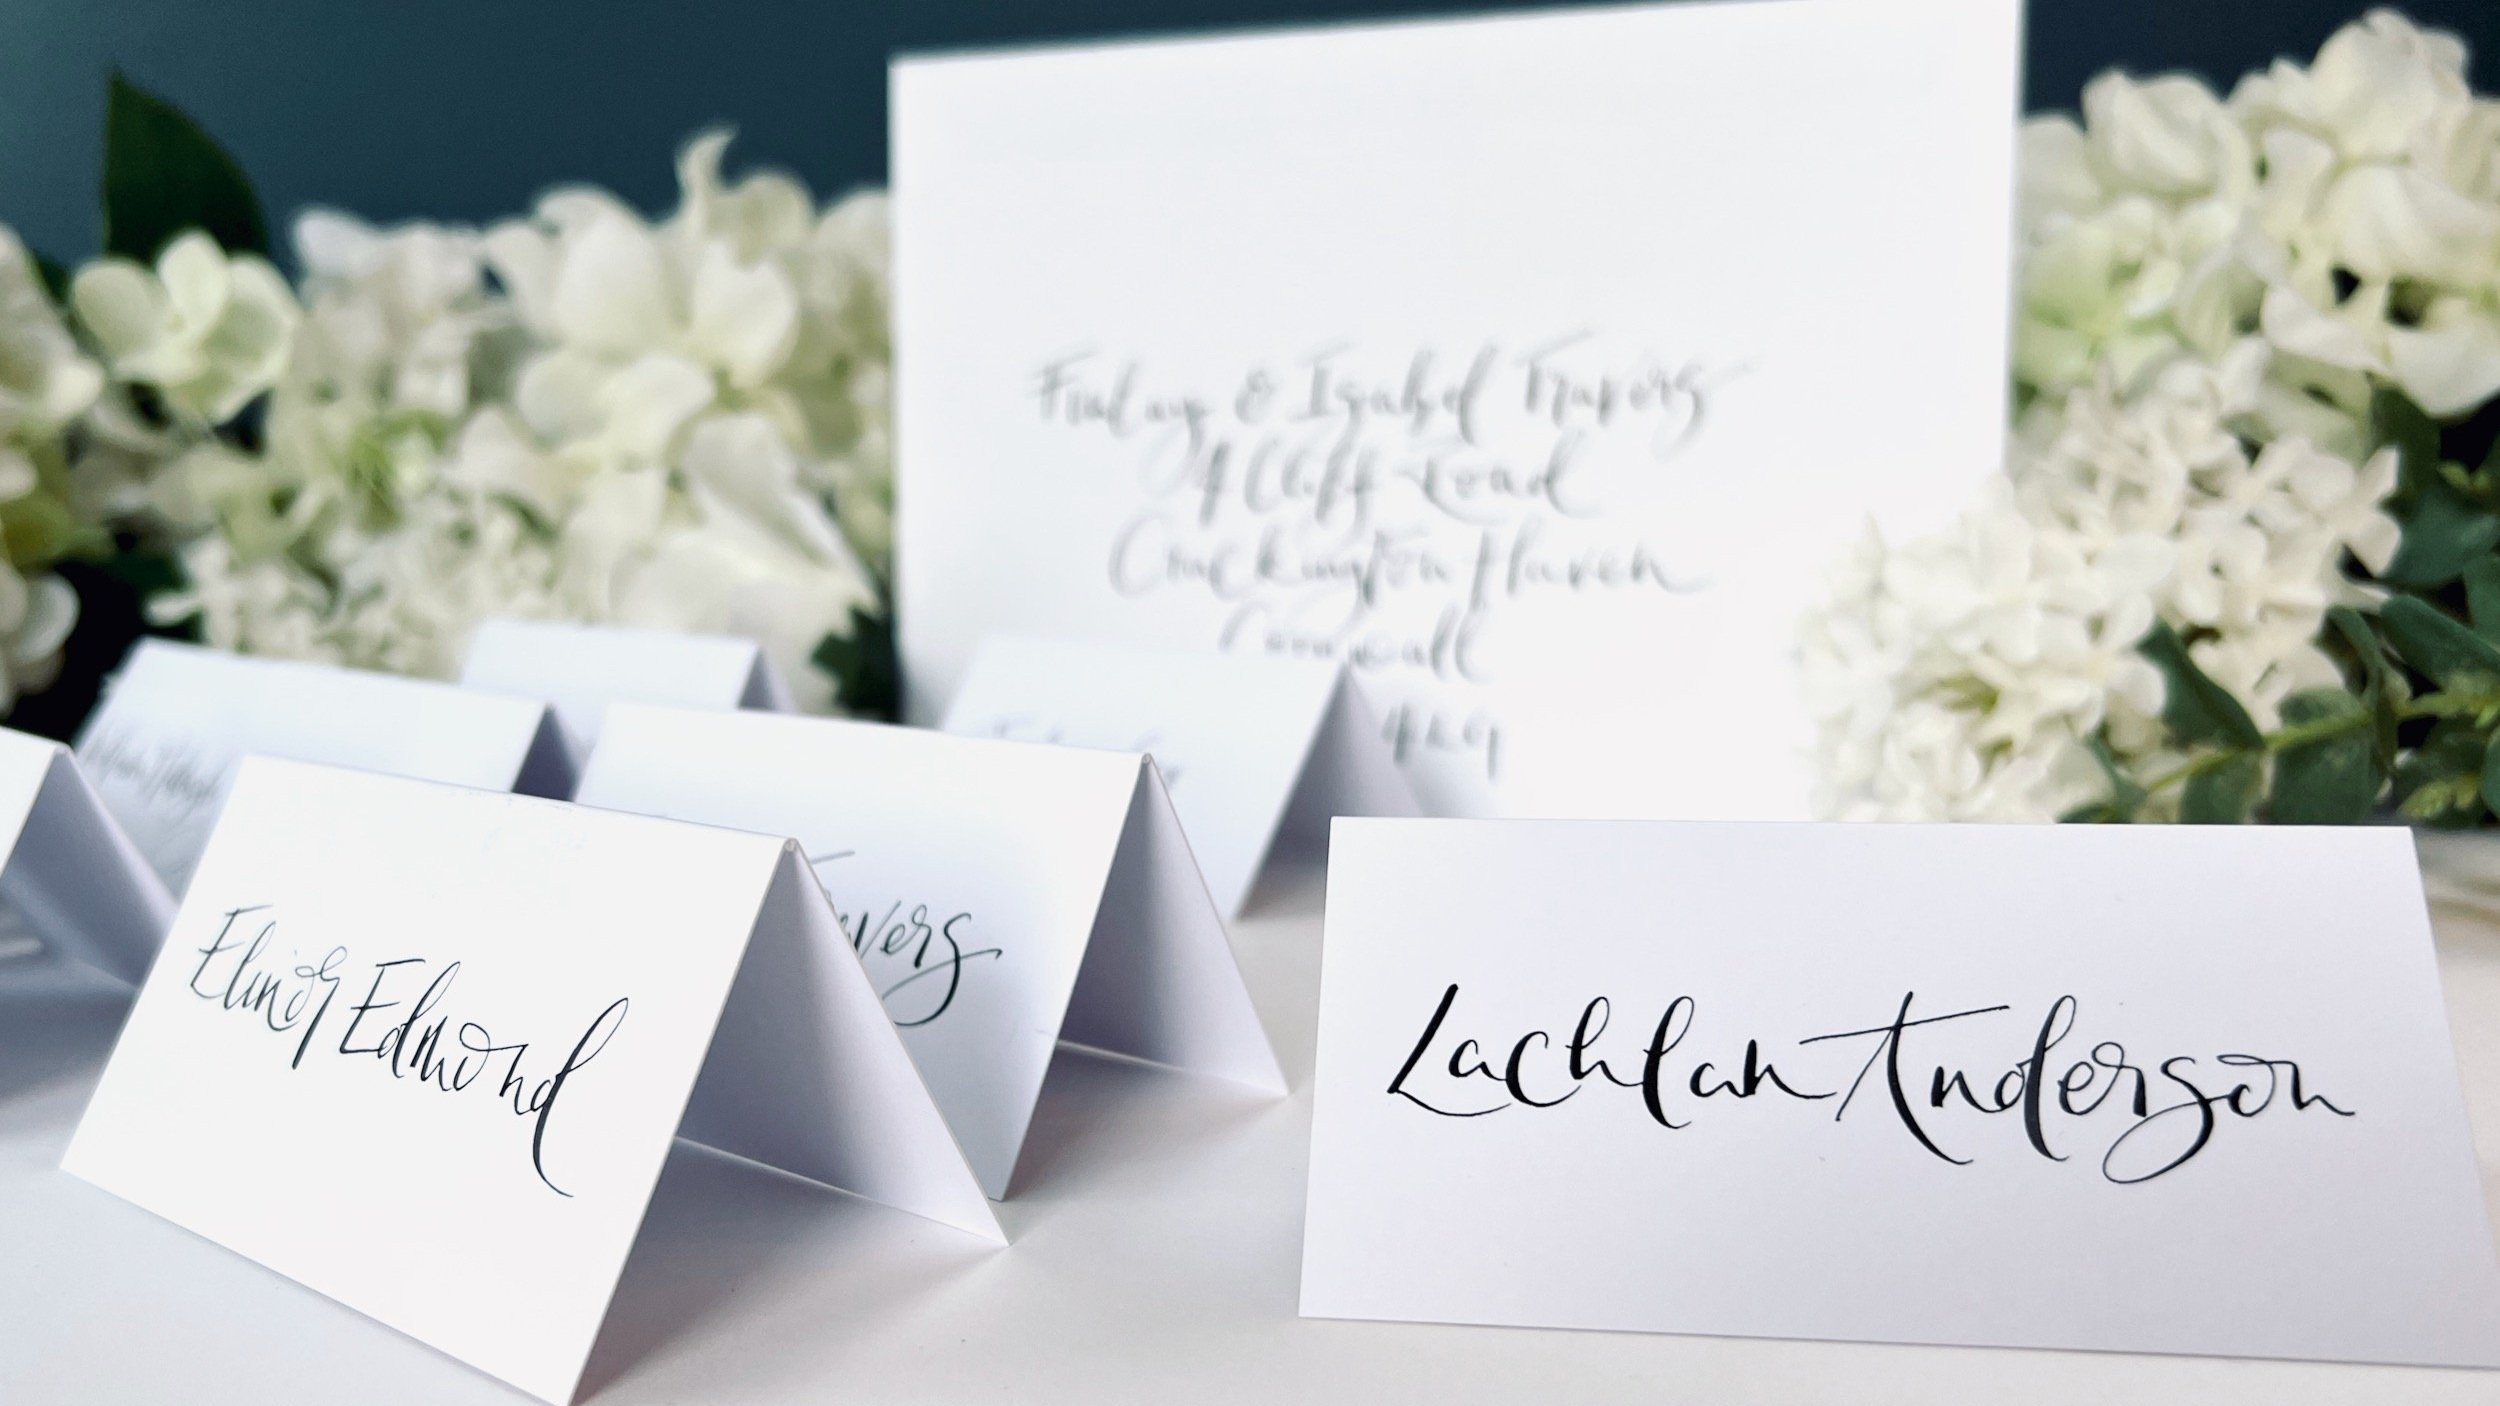 Delfont+Ink+Modern+style+wedding+envelopes+and+placecards+3.jpg